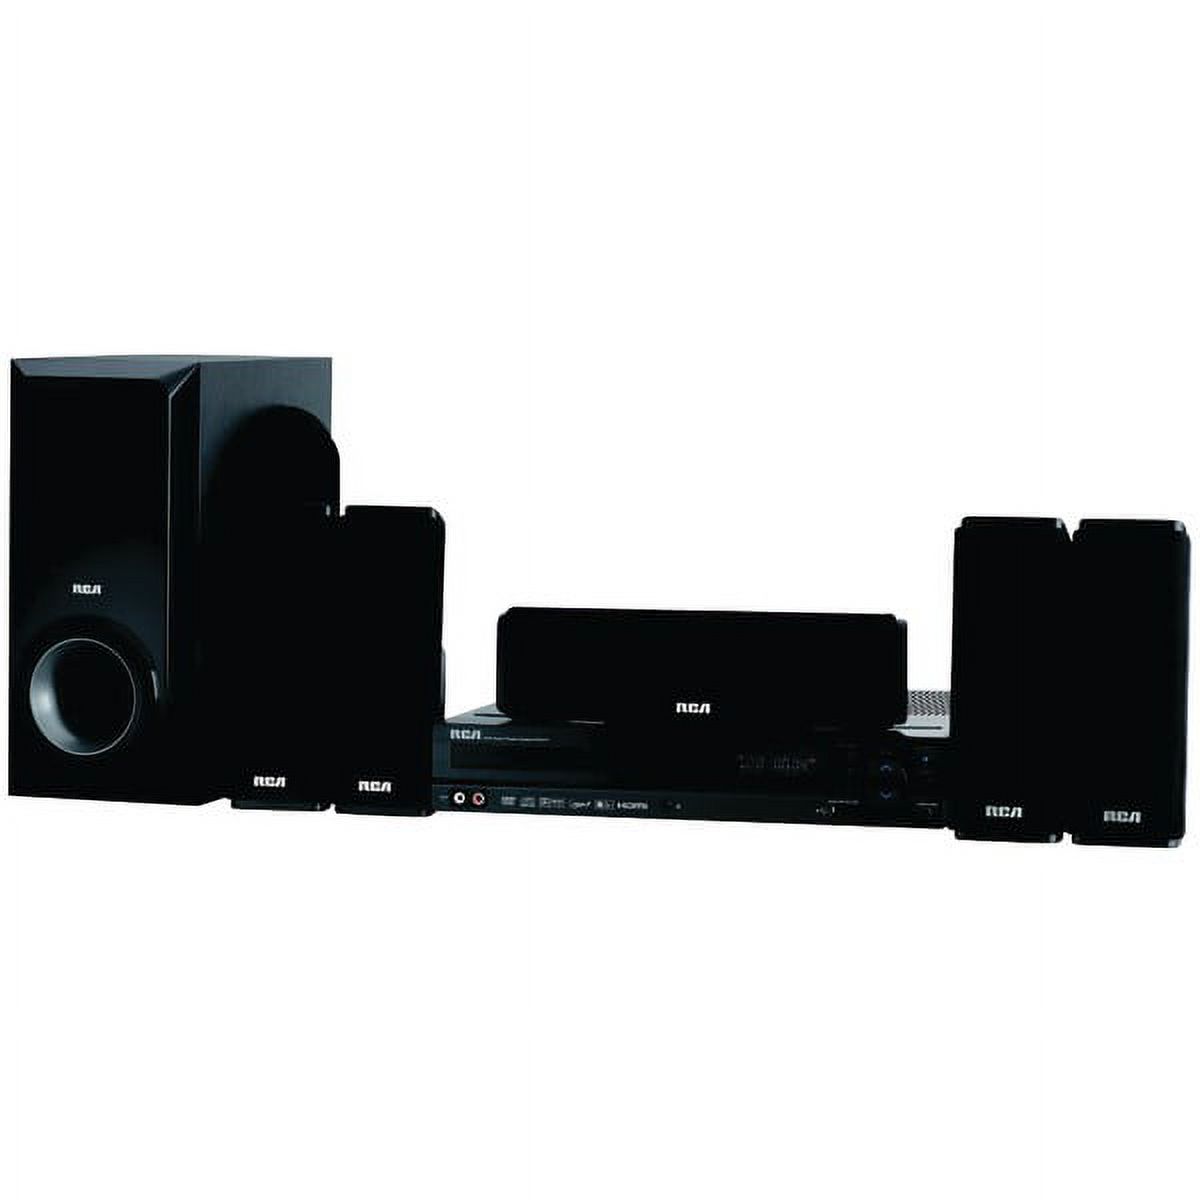 Rca Rtd317w, Dvd Home Theater System Wit - image 1 of 4